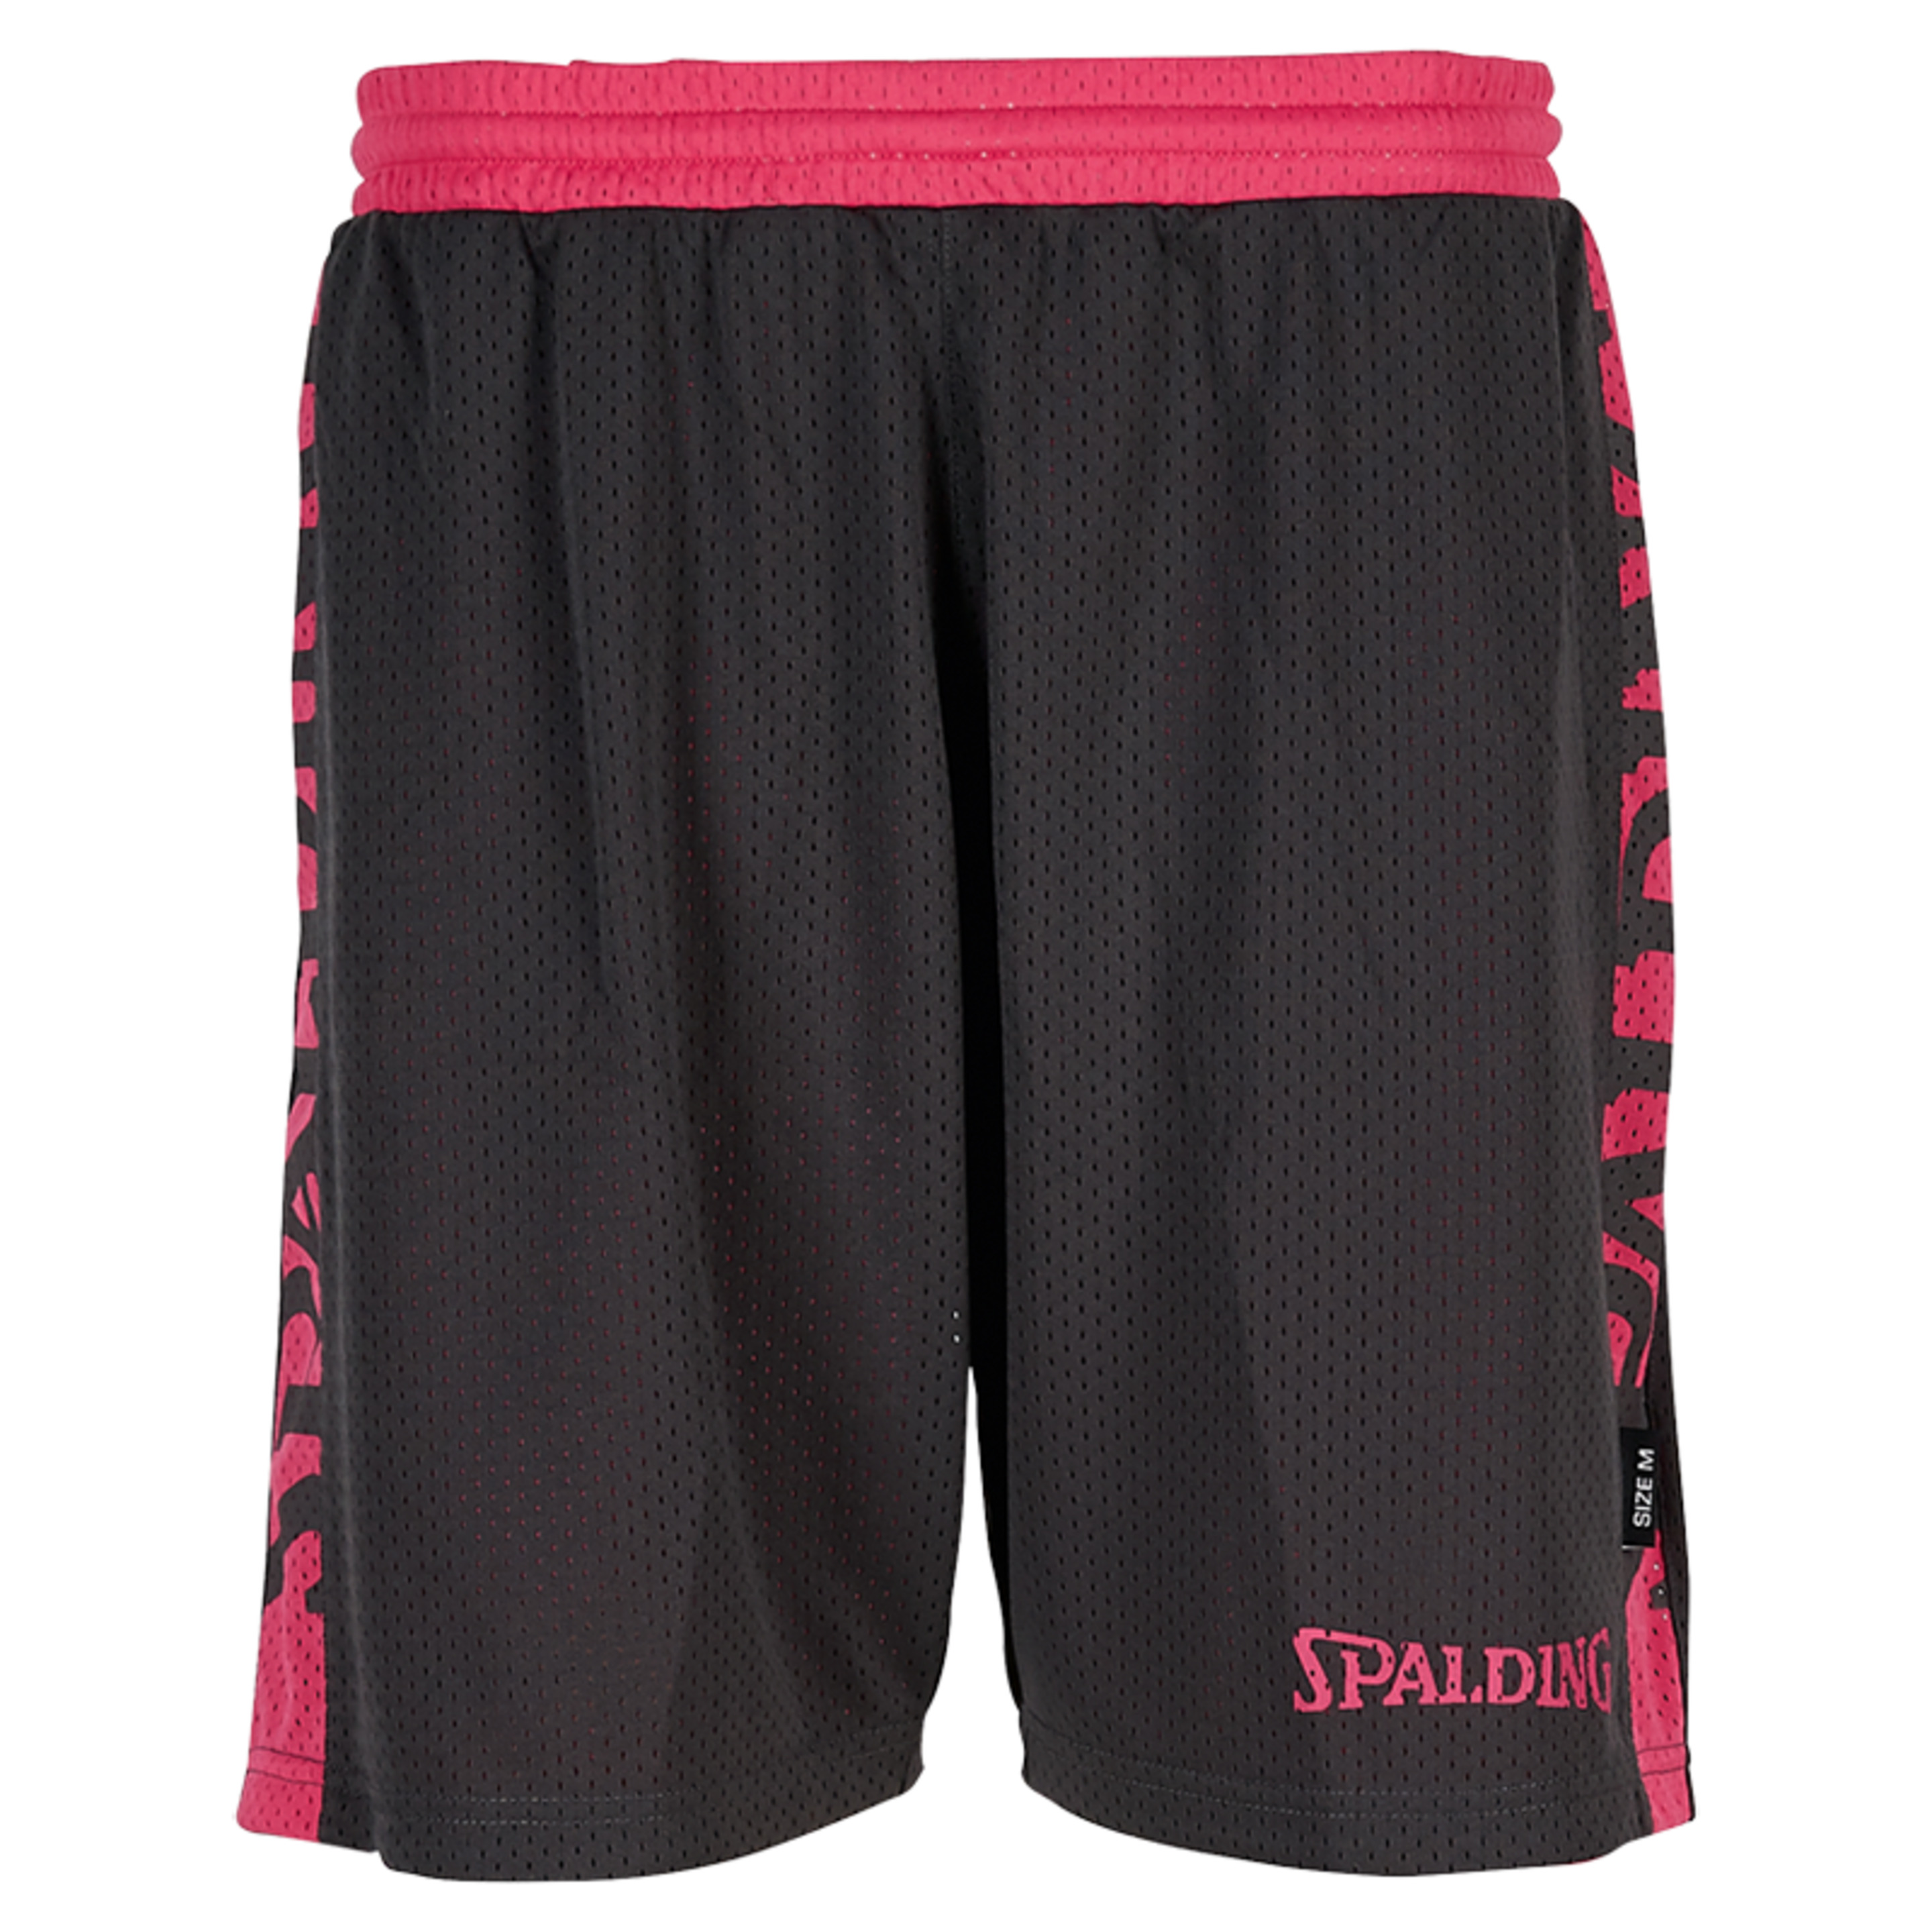 Essential Reversible Shorts 4her Black Spalding - gris-oscuro - 